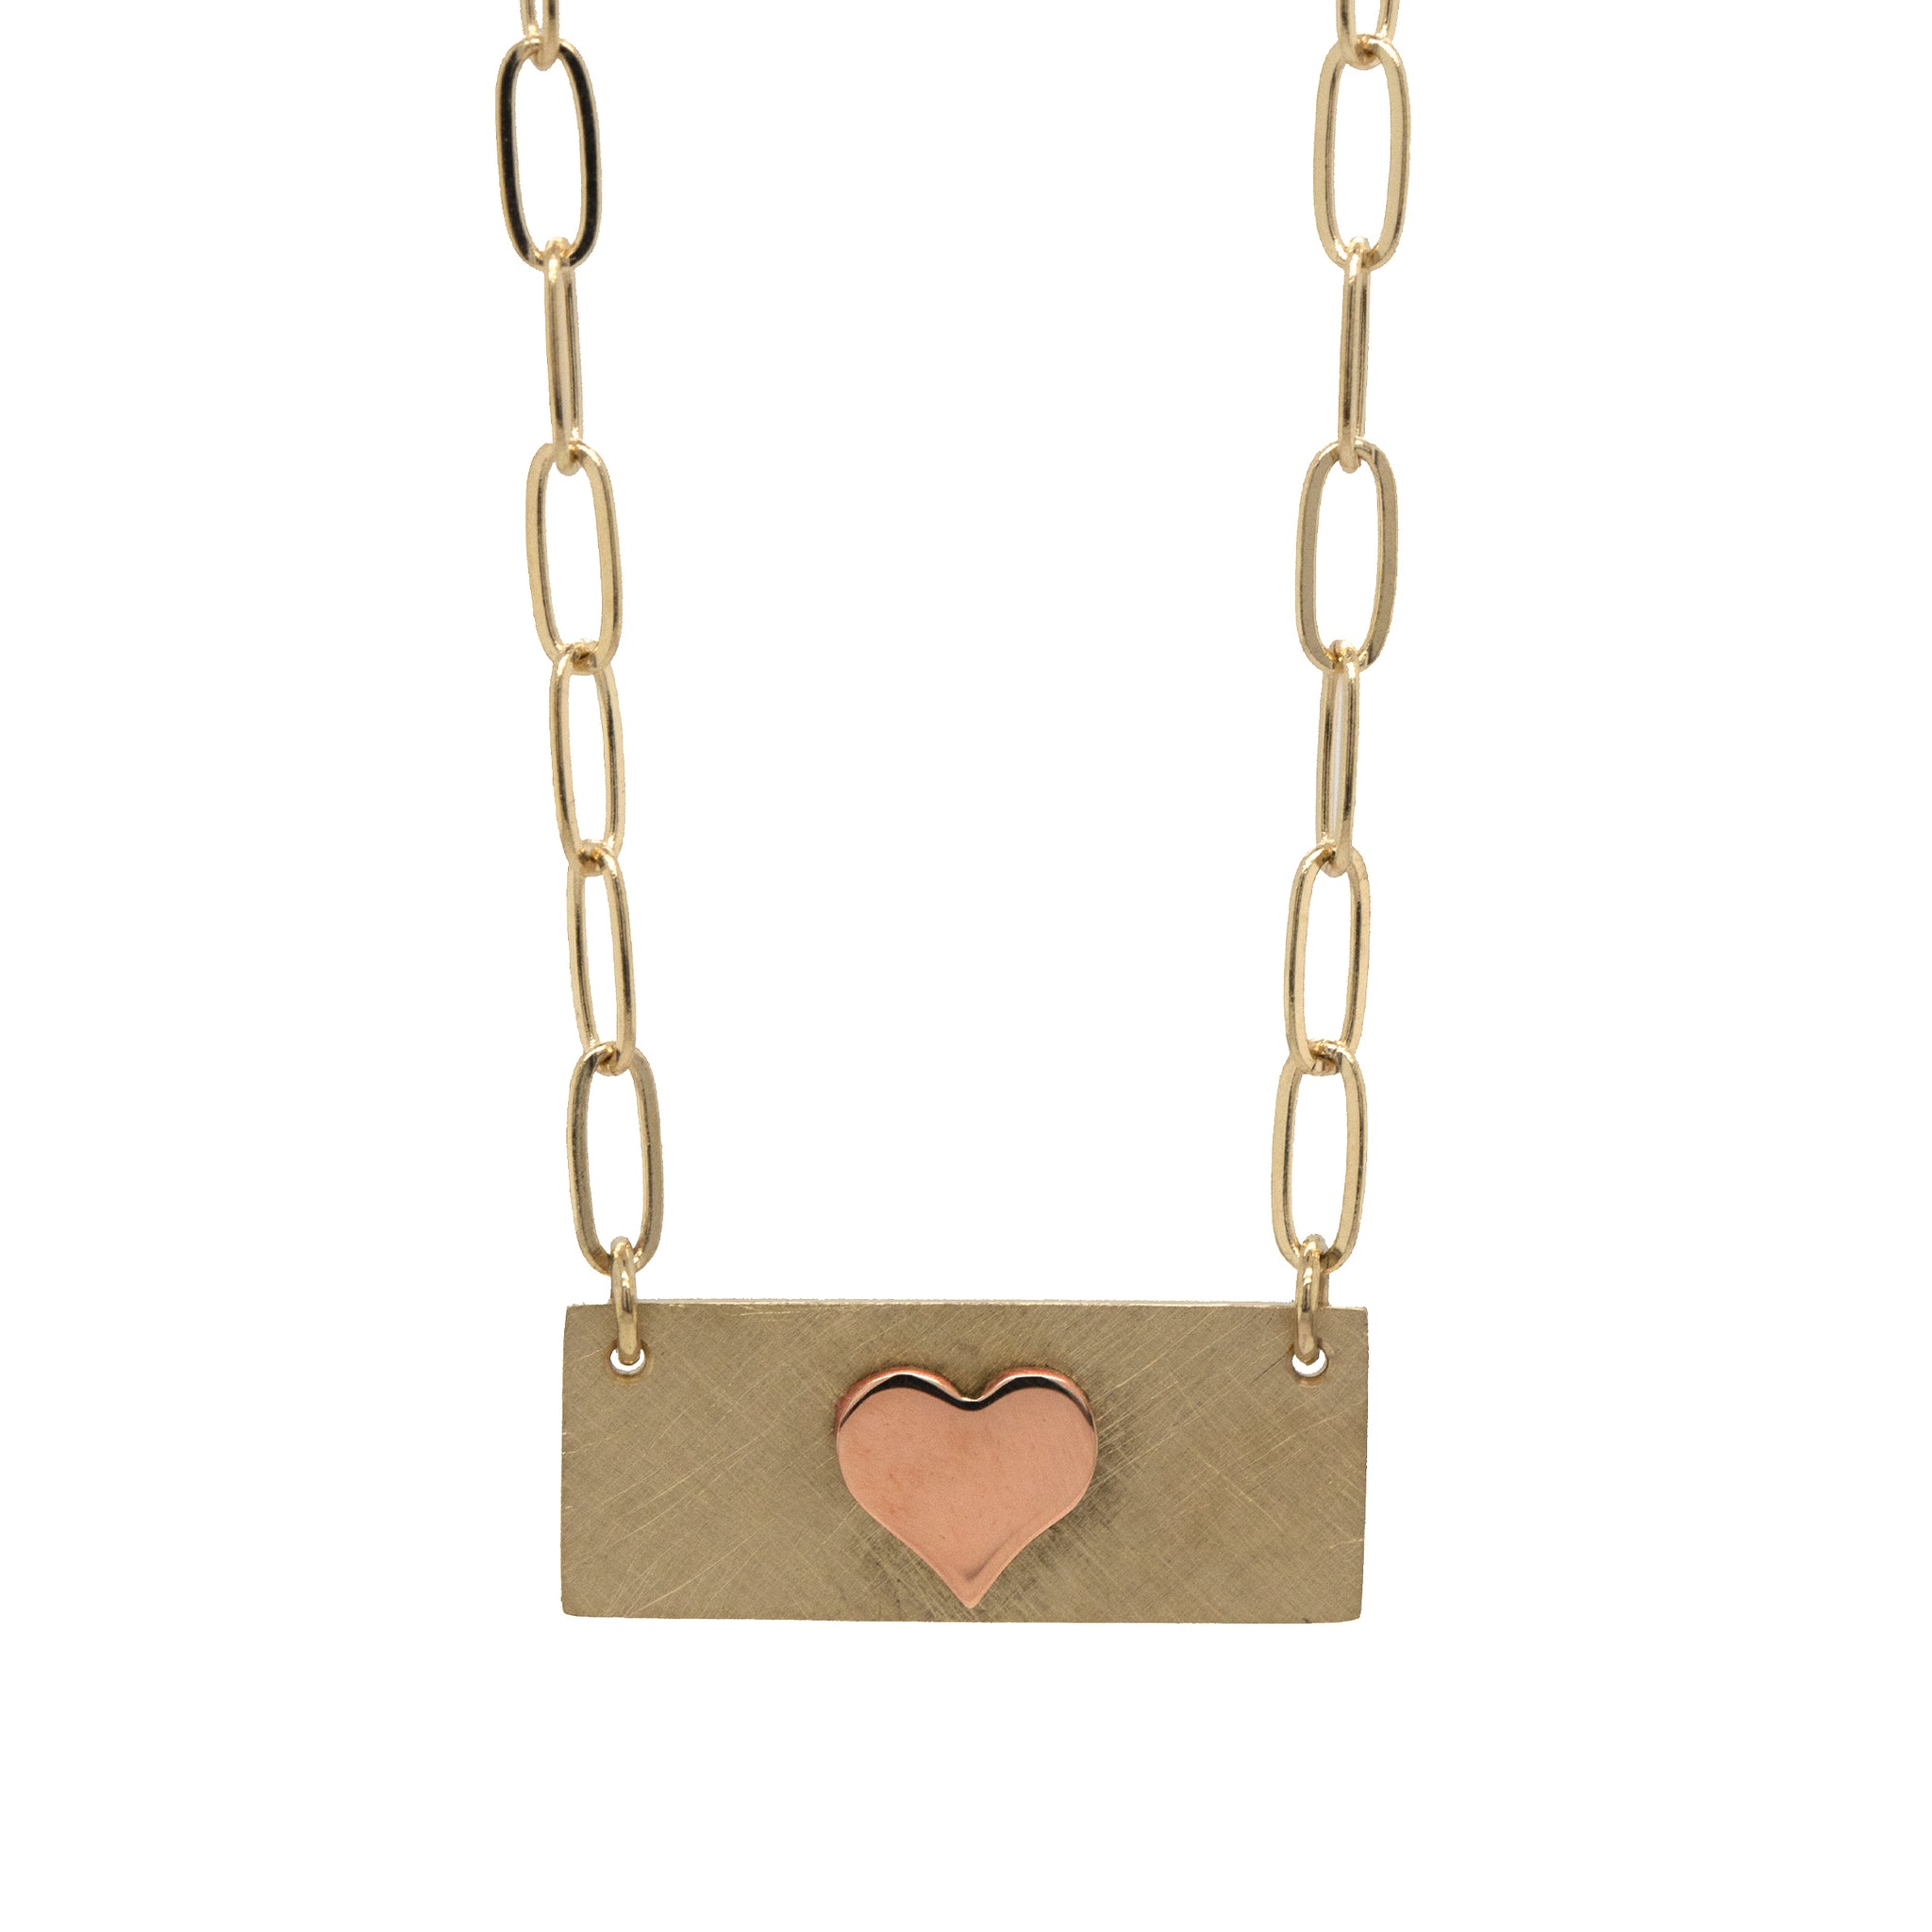 14K Gold Heart Necklace